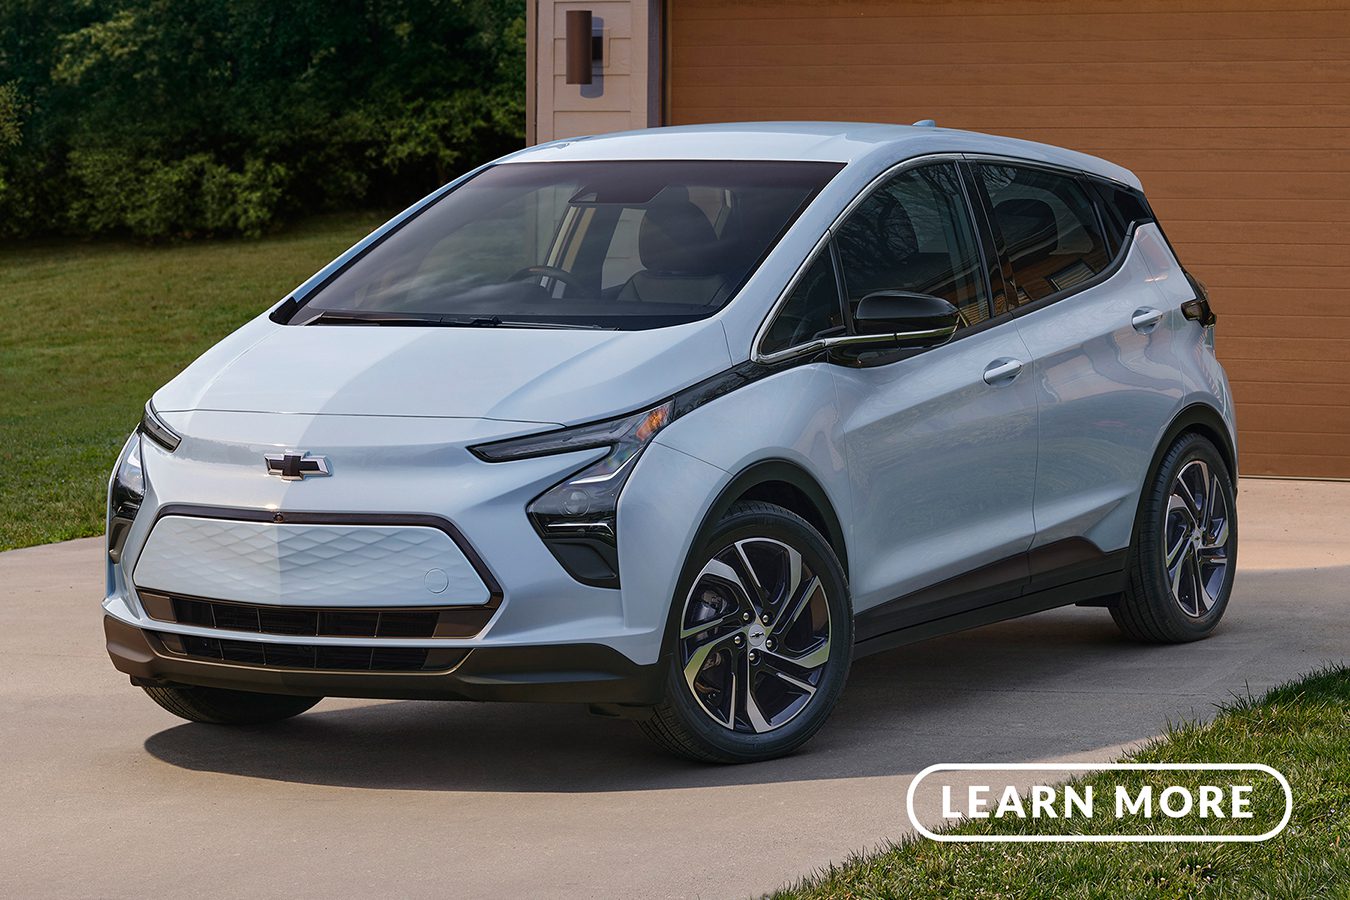 The 2020 chevrolet bolt parked in front of a garage.